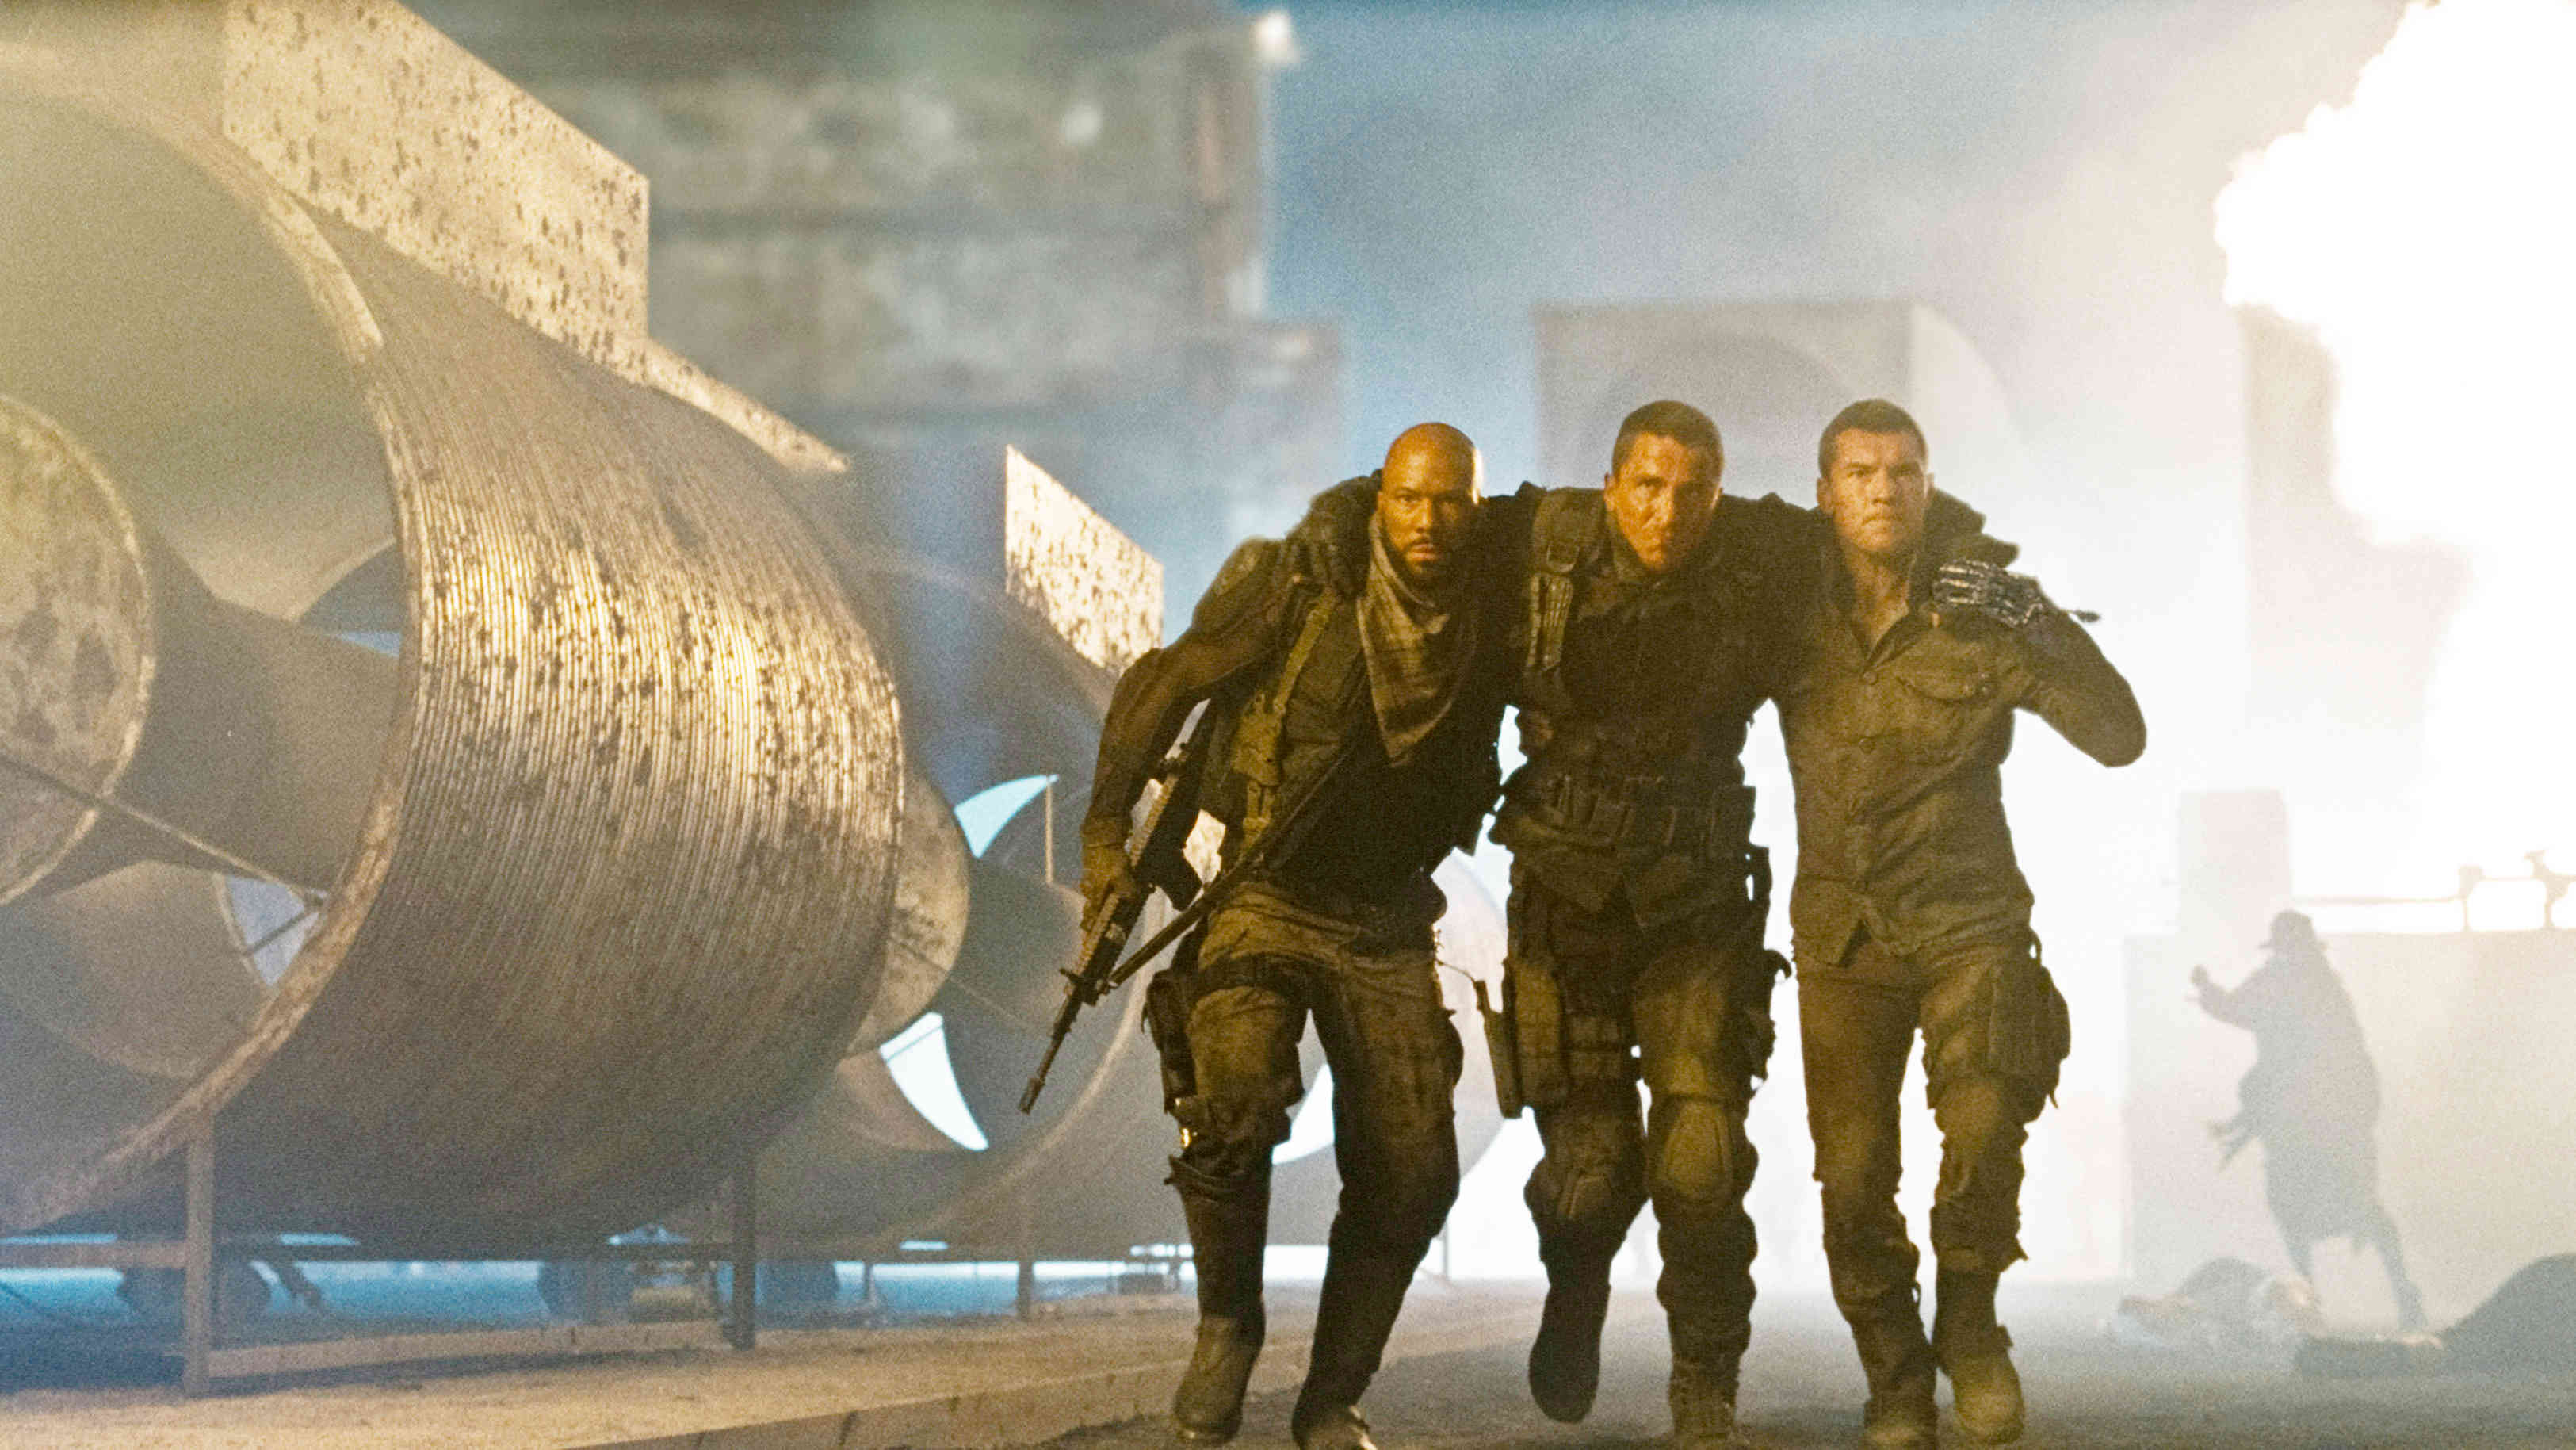 Common, Christian Bale and Sam Worthington in Warner Bros. Pictures' Terminator Salvation (2009)